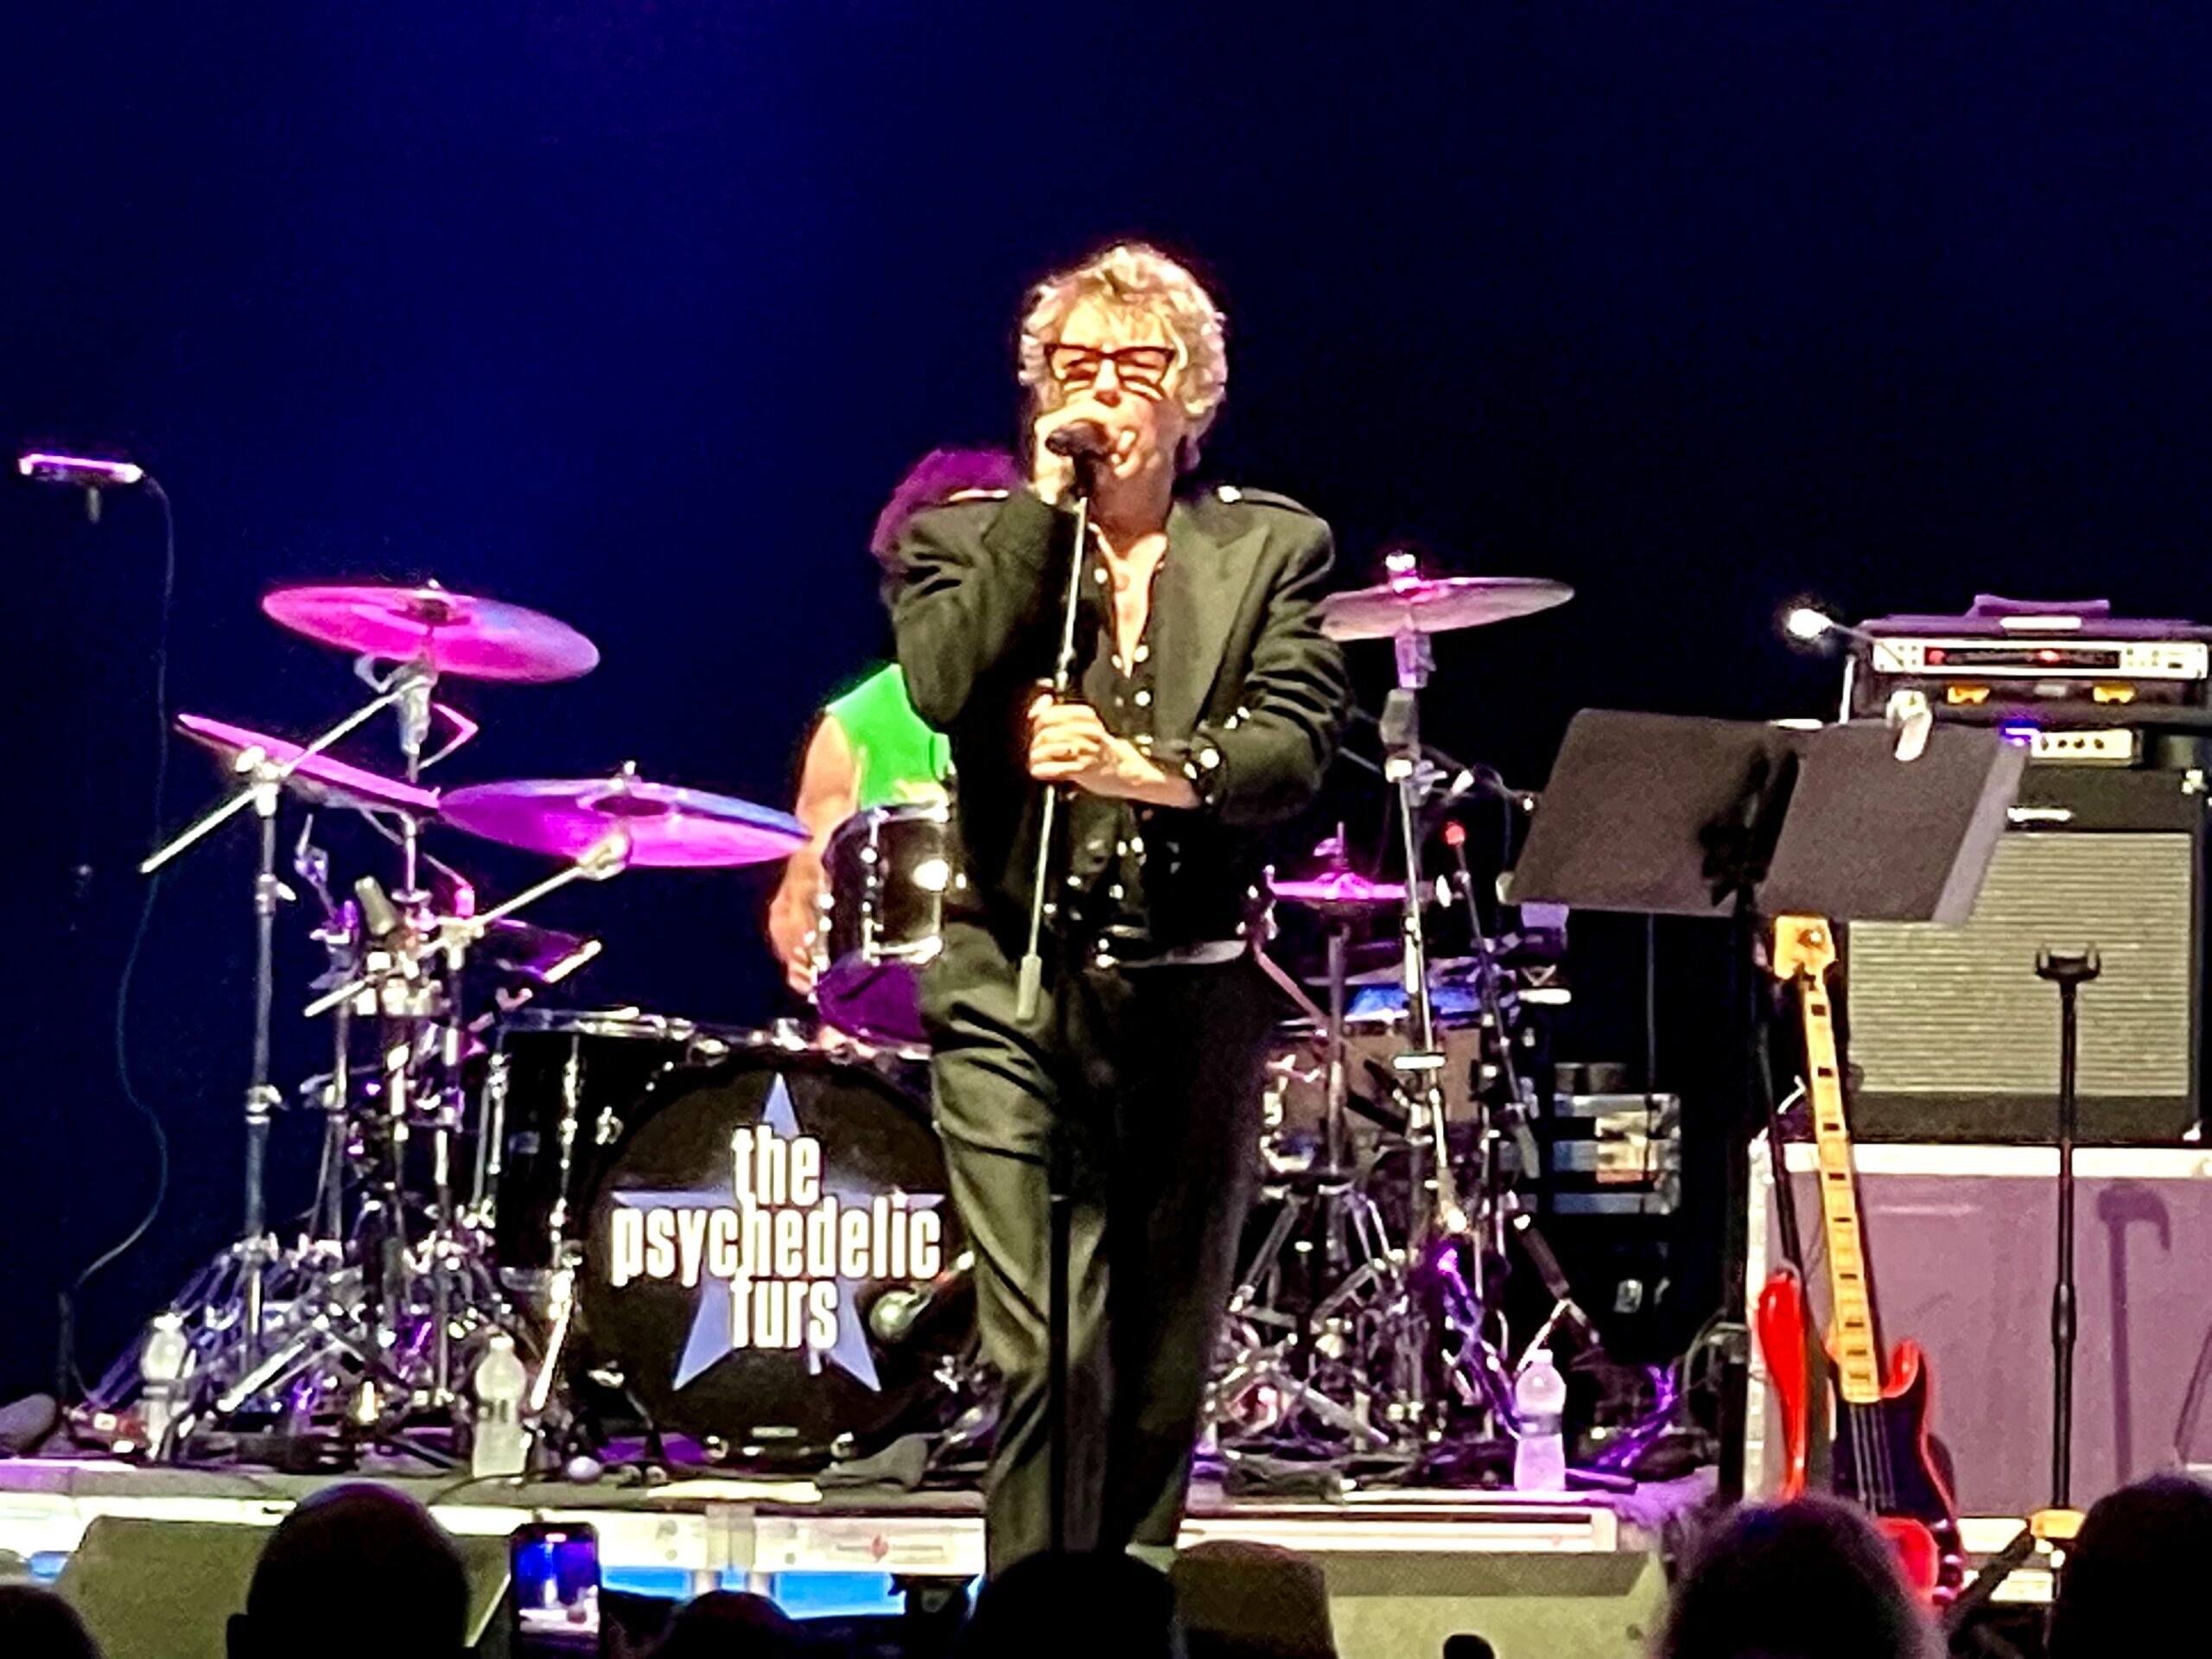 psychedelic furs tour 2022